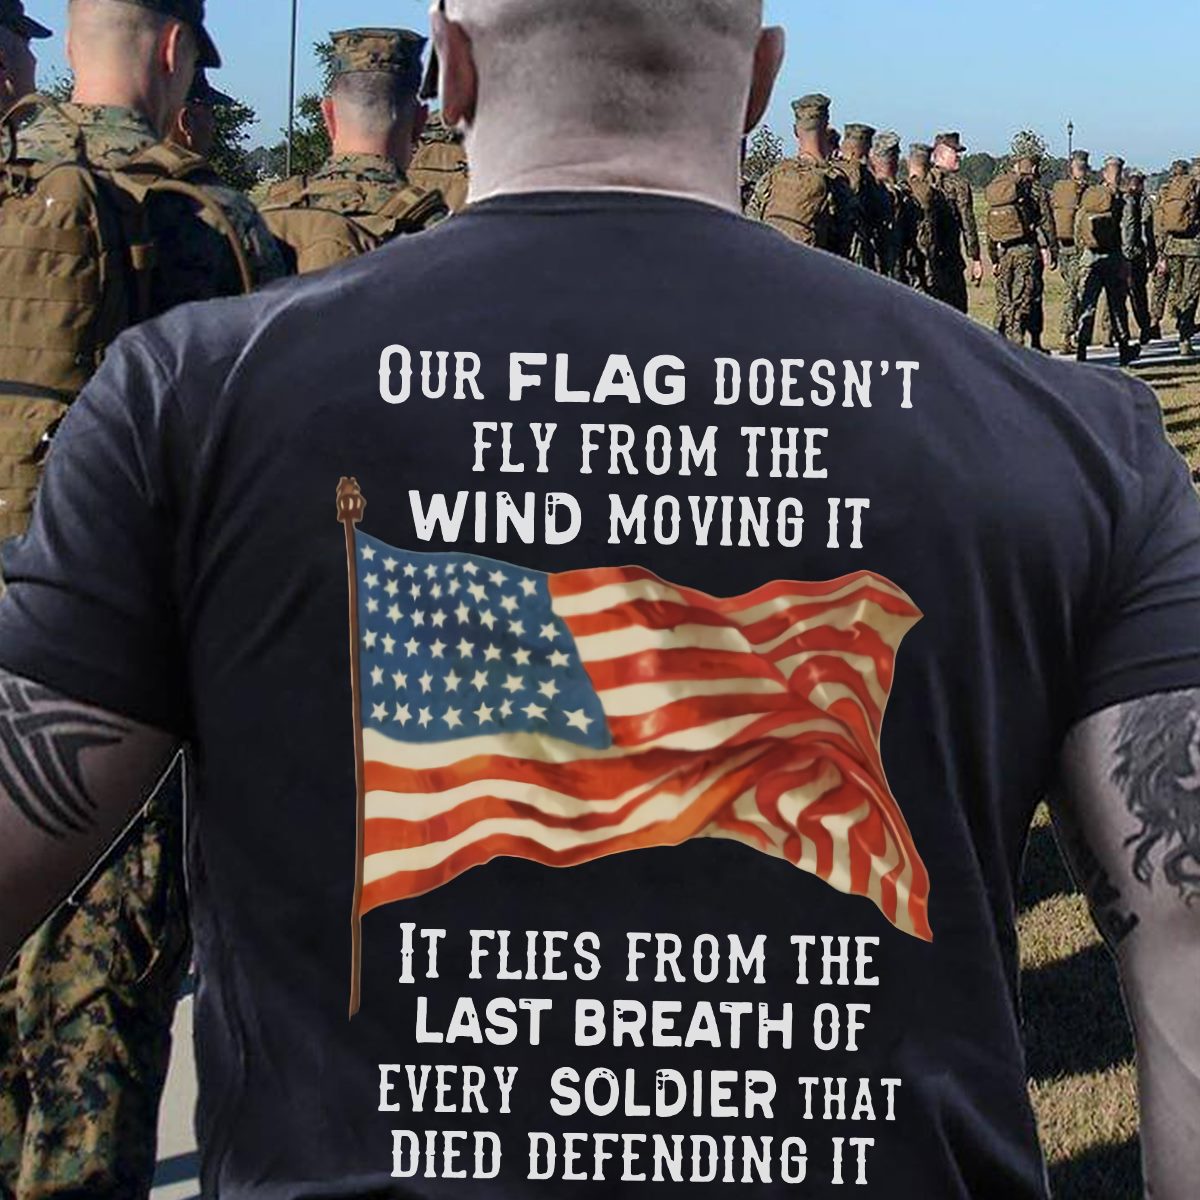 Our flag doesn't fly from the wind moving it it flies from the last breath of every soldier